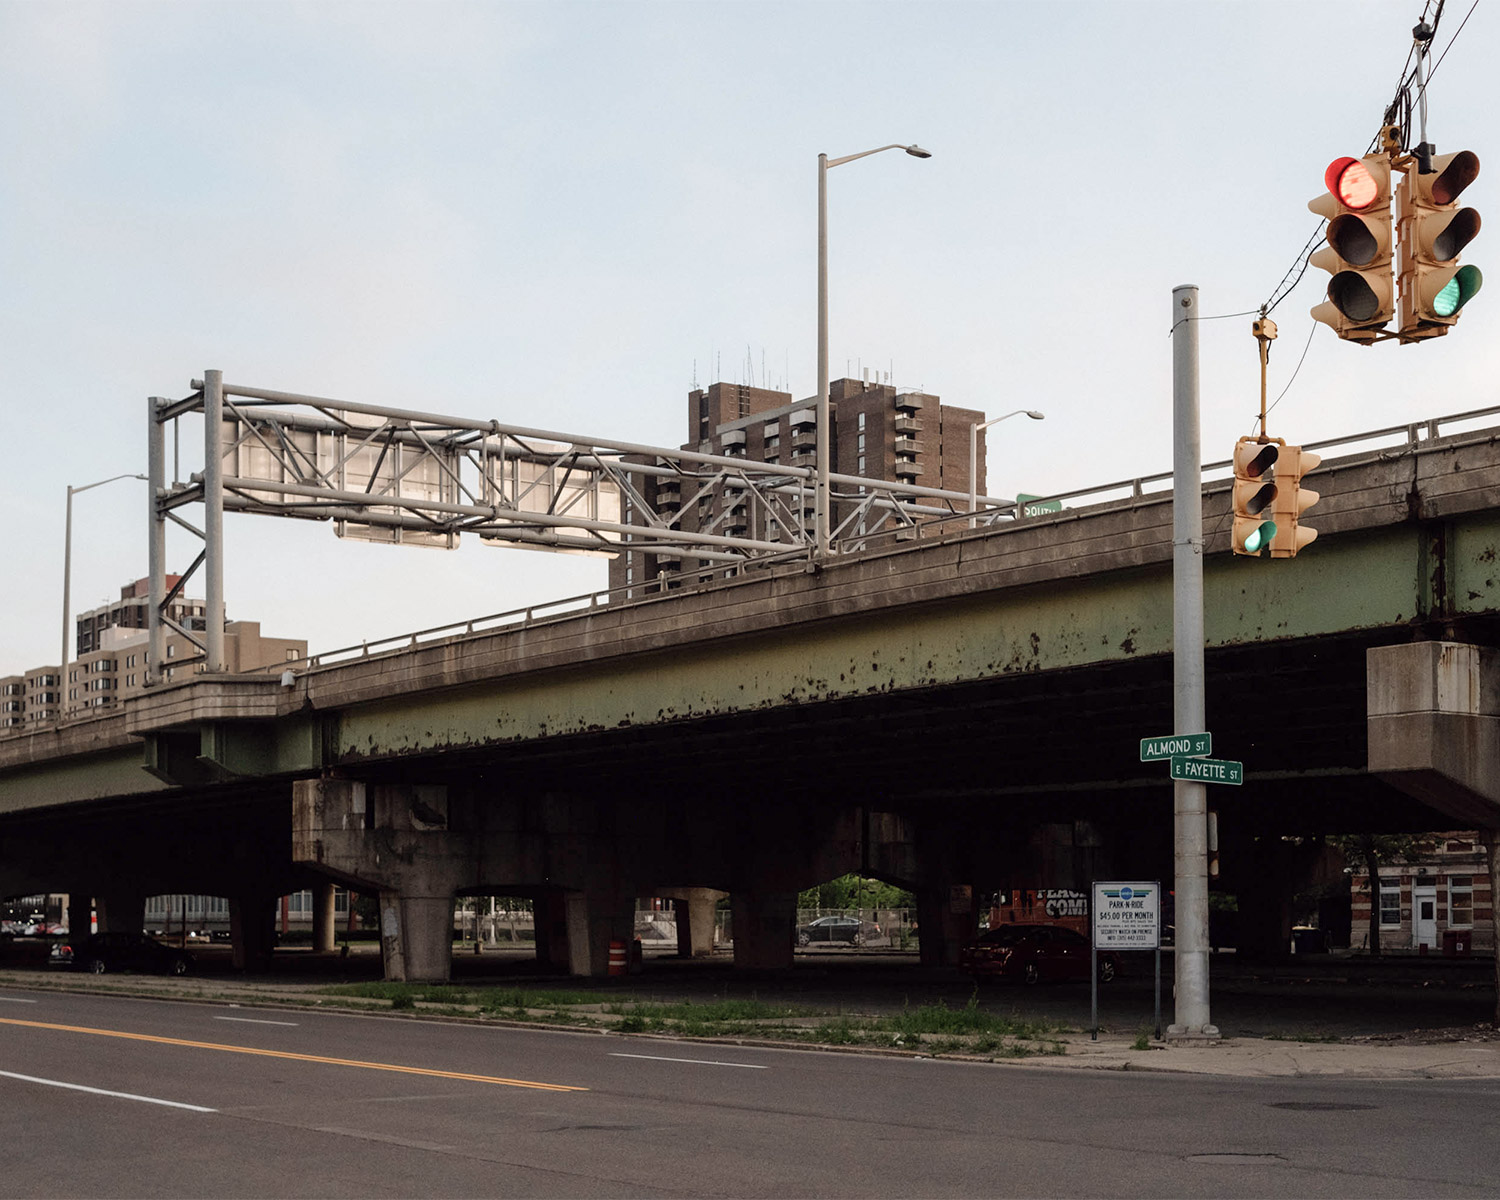 An industrial street scene showing a rusty overpass with traffic lights in the foreground.